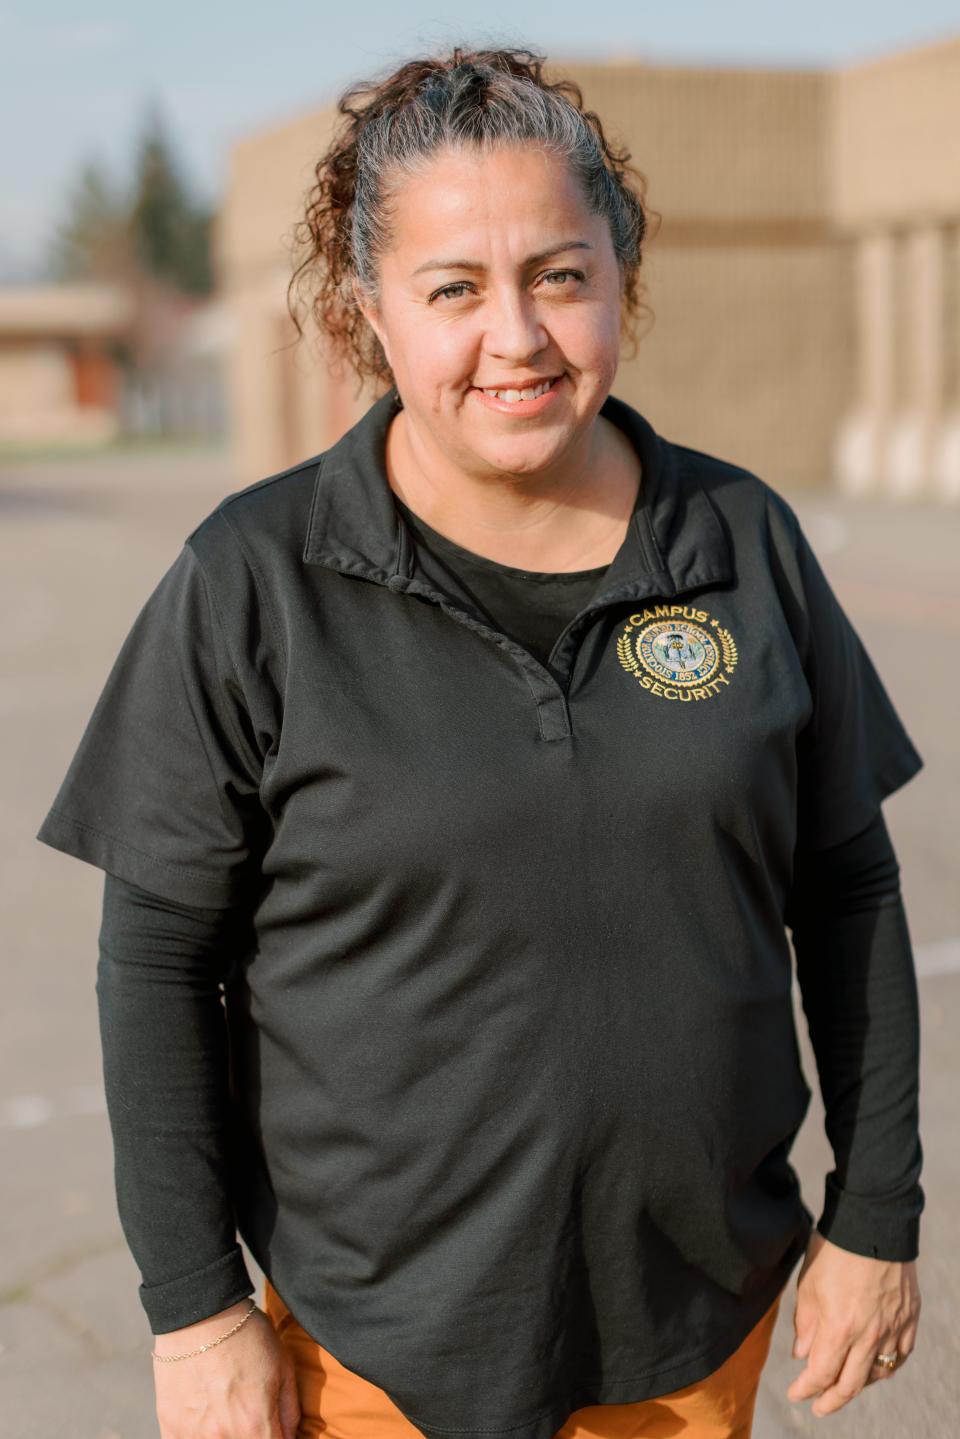 Lorena Casillas is a campus security assistant at Stockton Unified School District.